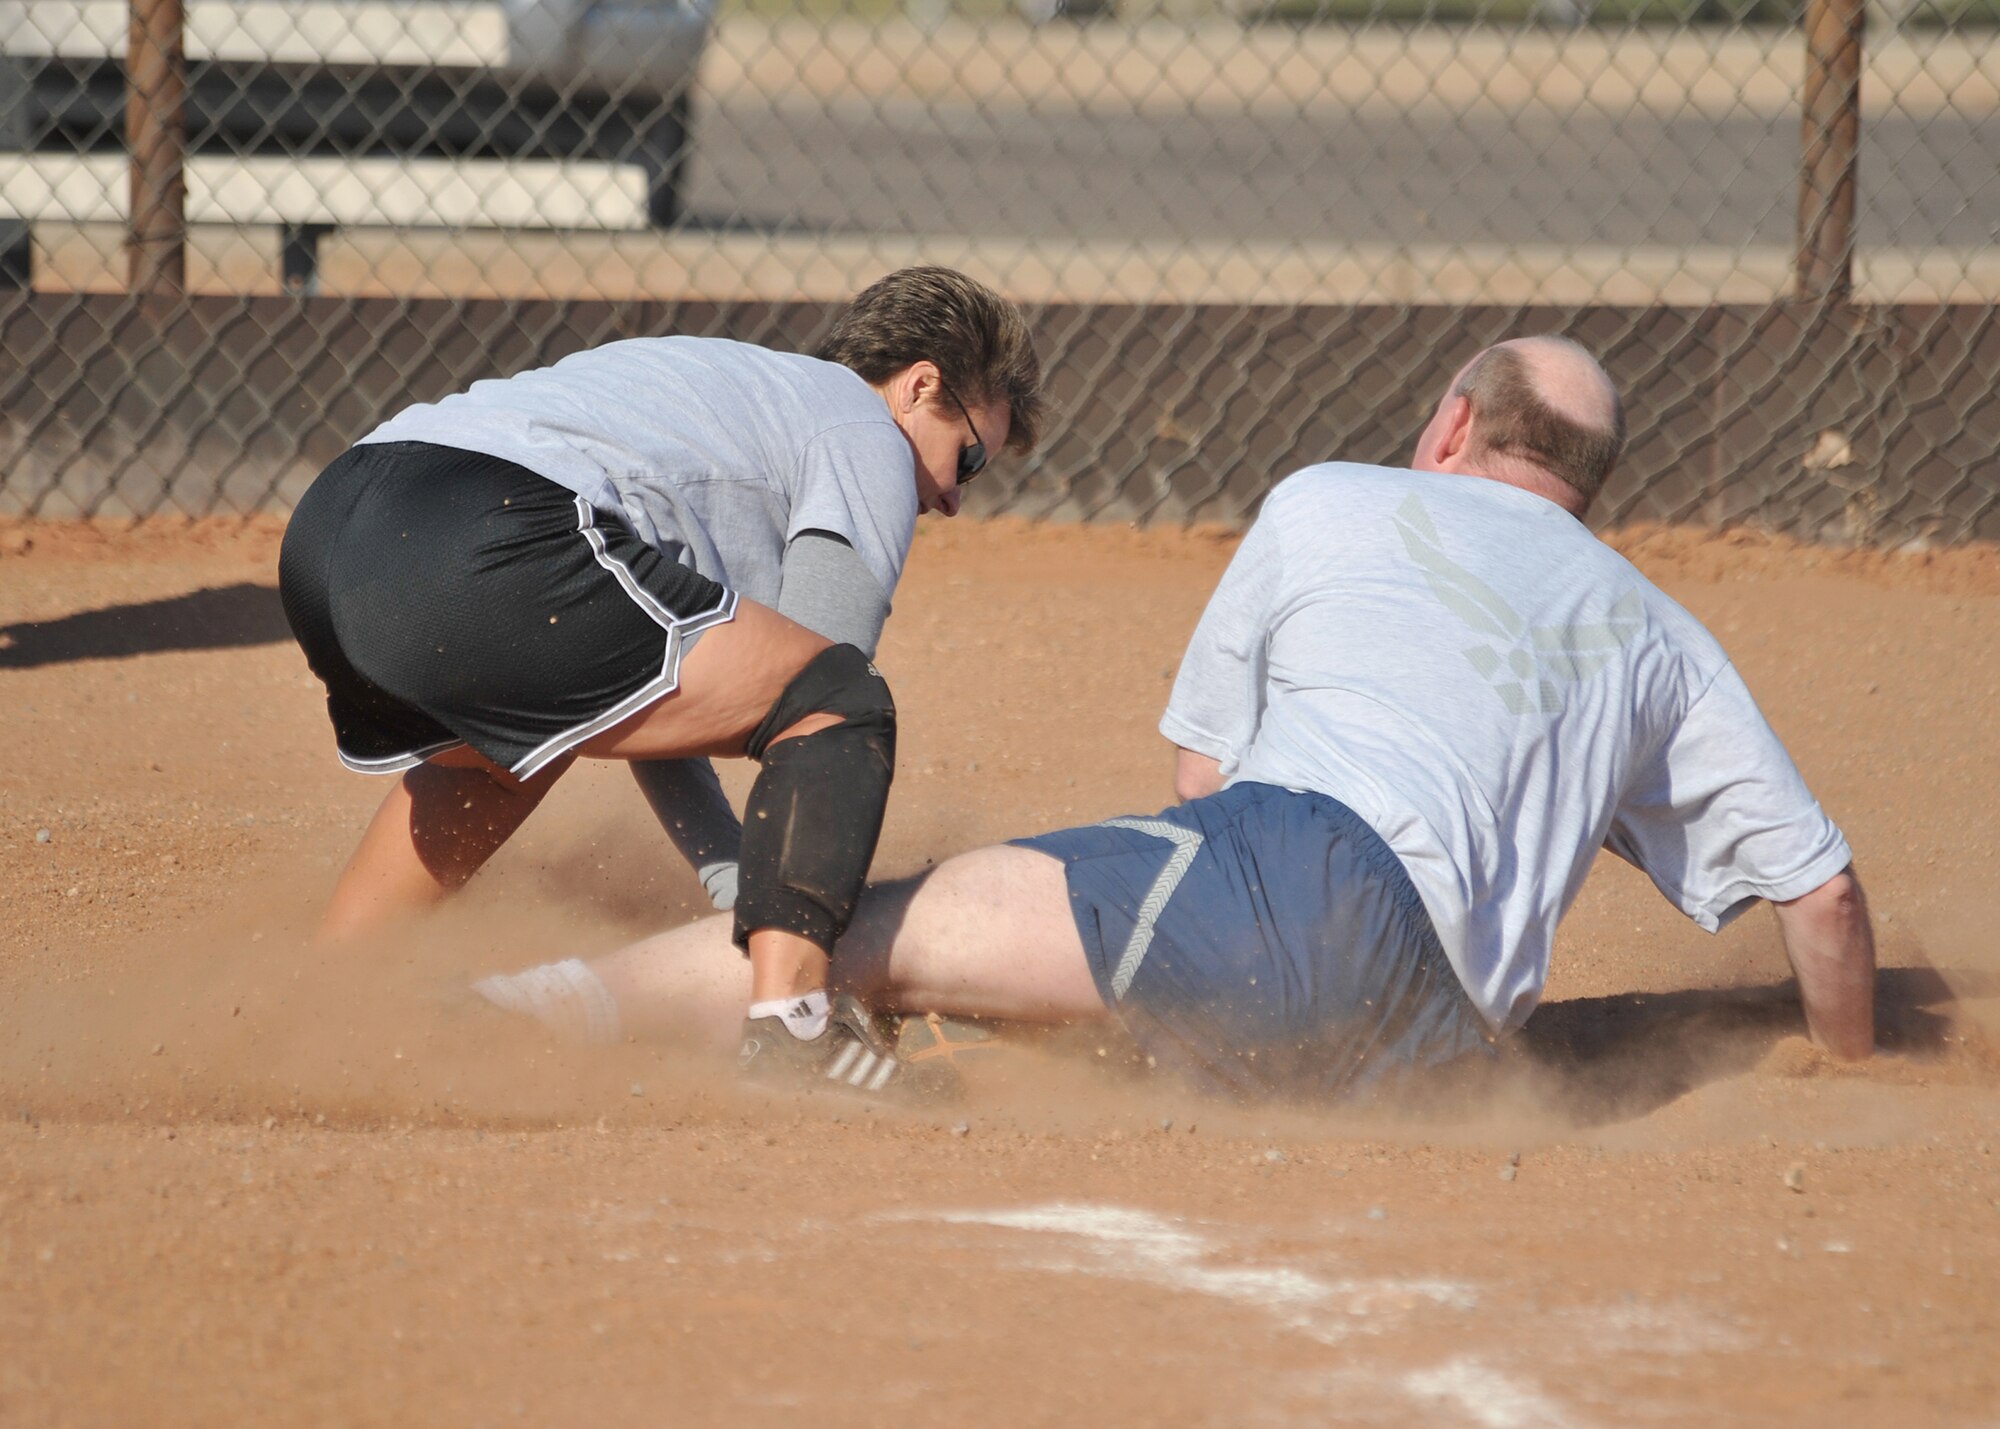 Lt. Col. Todd Alan, 377th Mission Support Group, slides into home plate as Laura Armstrong 498th, tries to tag him out, Oct. 13, during a Wing Sports Day softball event.  U.S. Air Force Photo by Todd Berenger